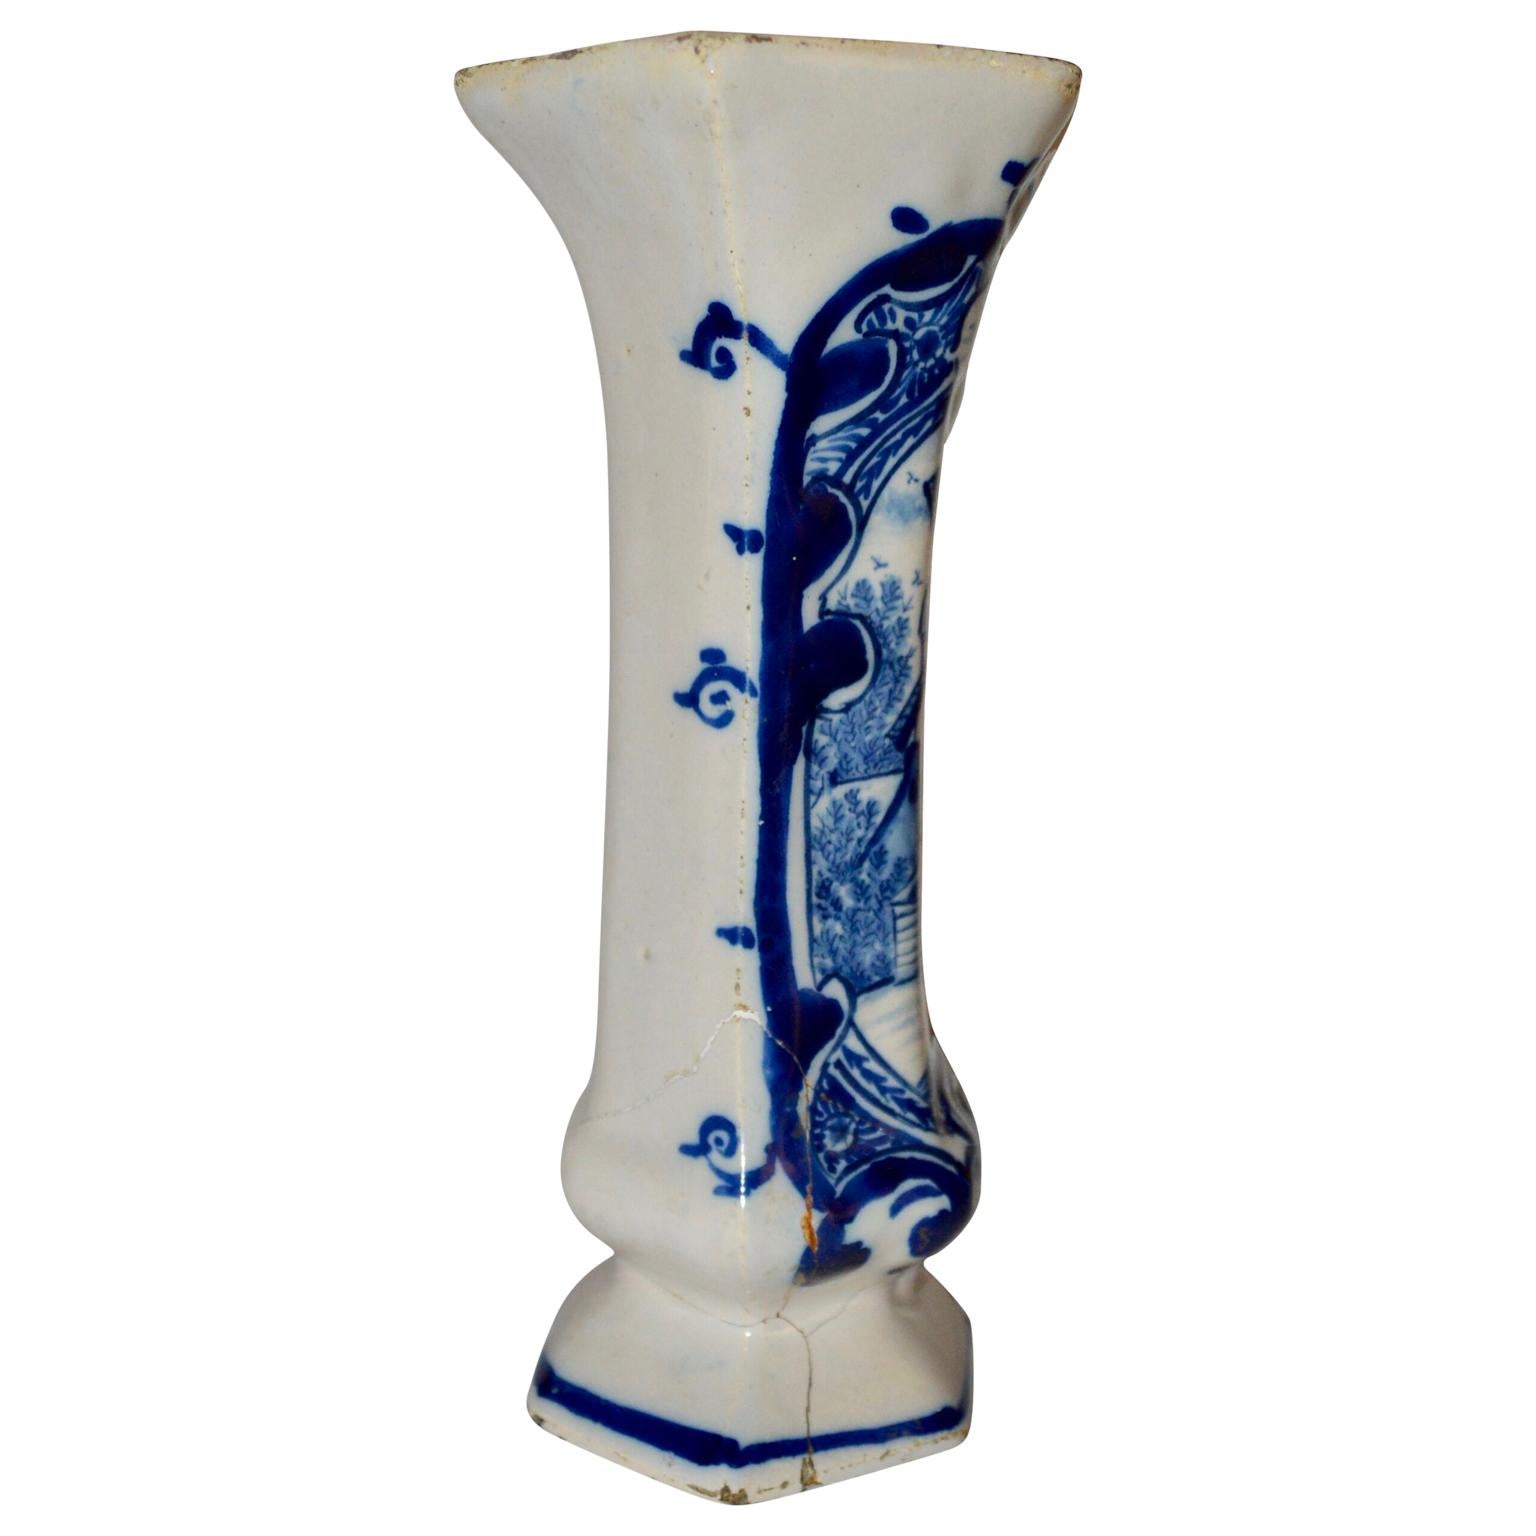 Late 18th century blue and white Dutch delft vase is painted with a traditional design in cobalt blue.